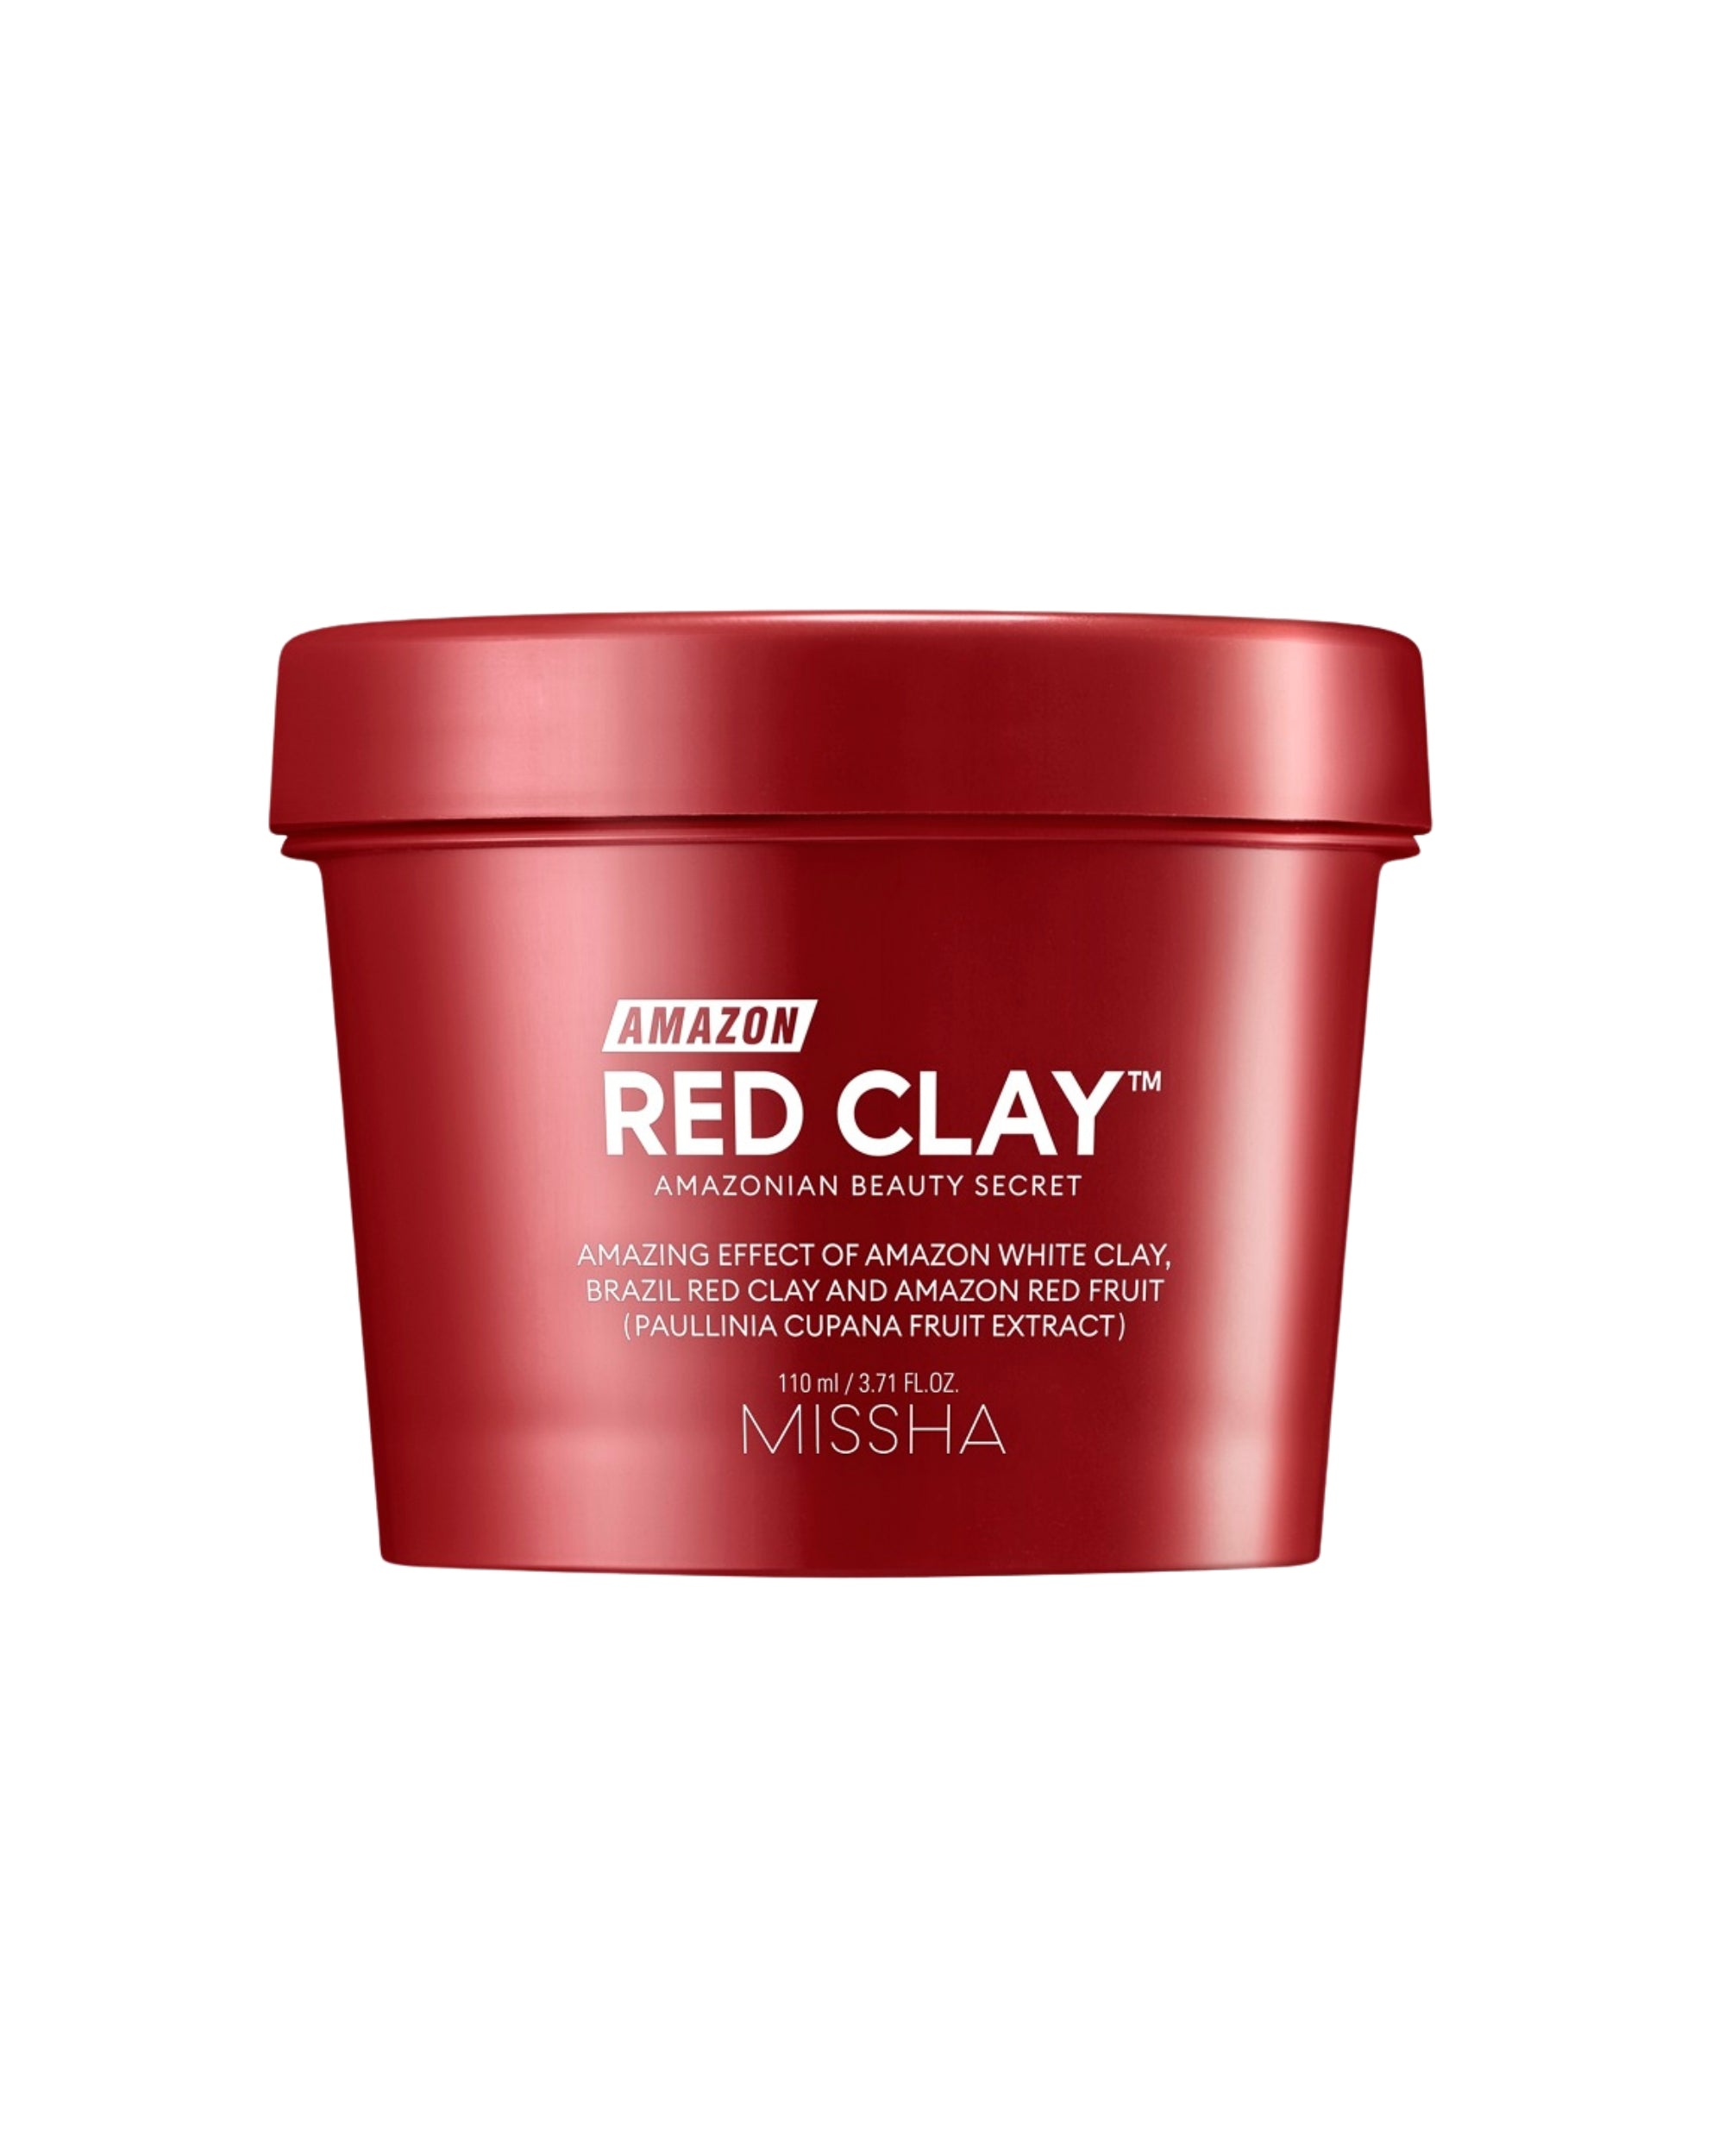 Amazon Red Clay Pore Mask